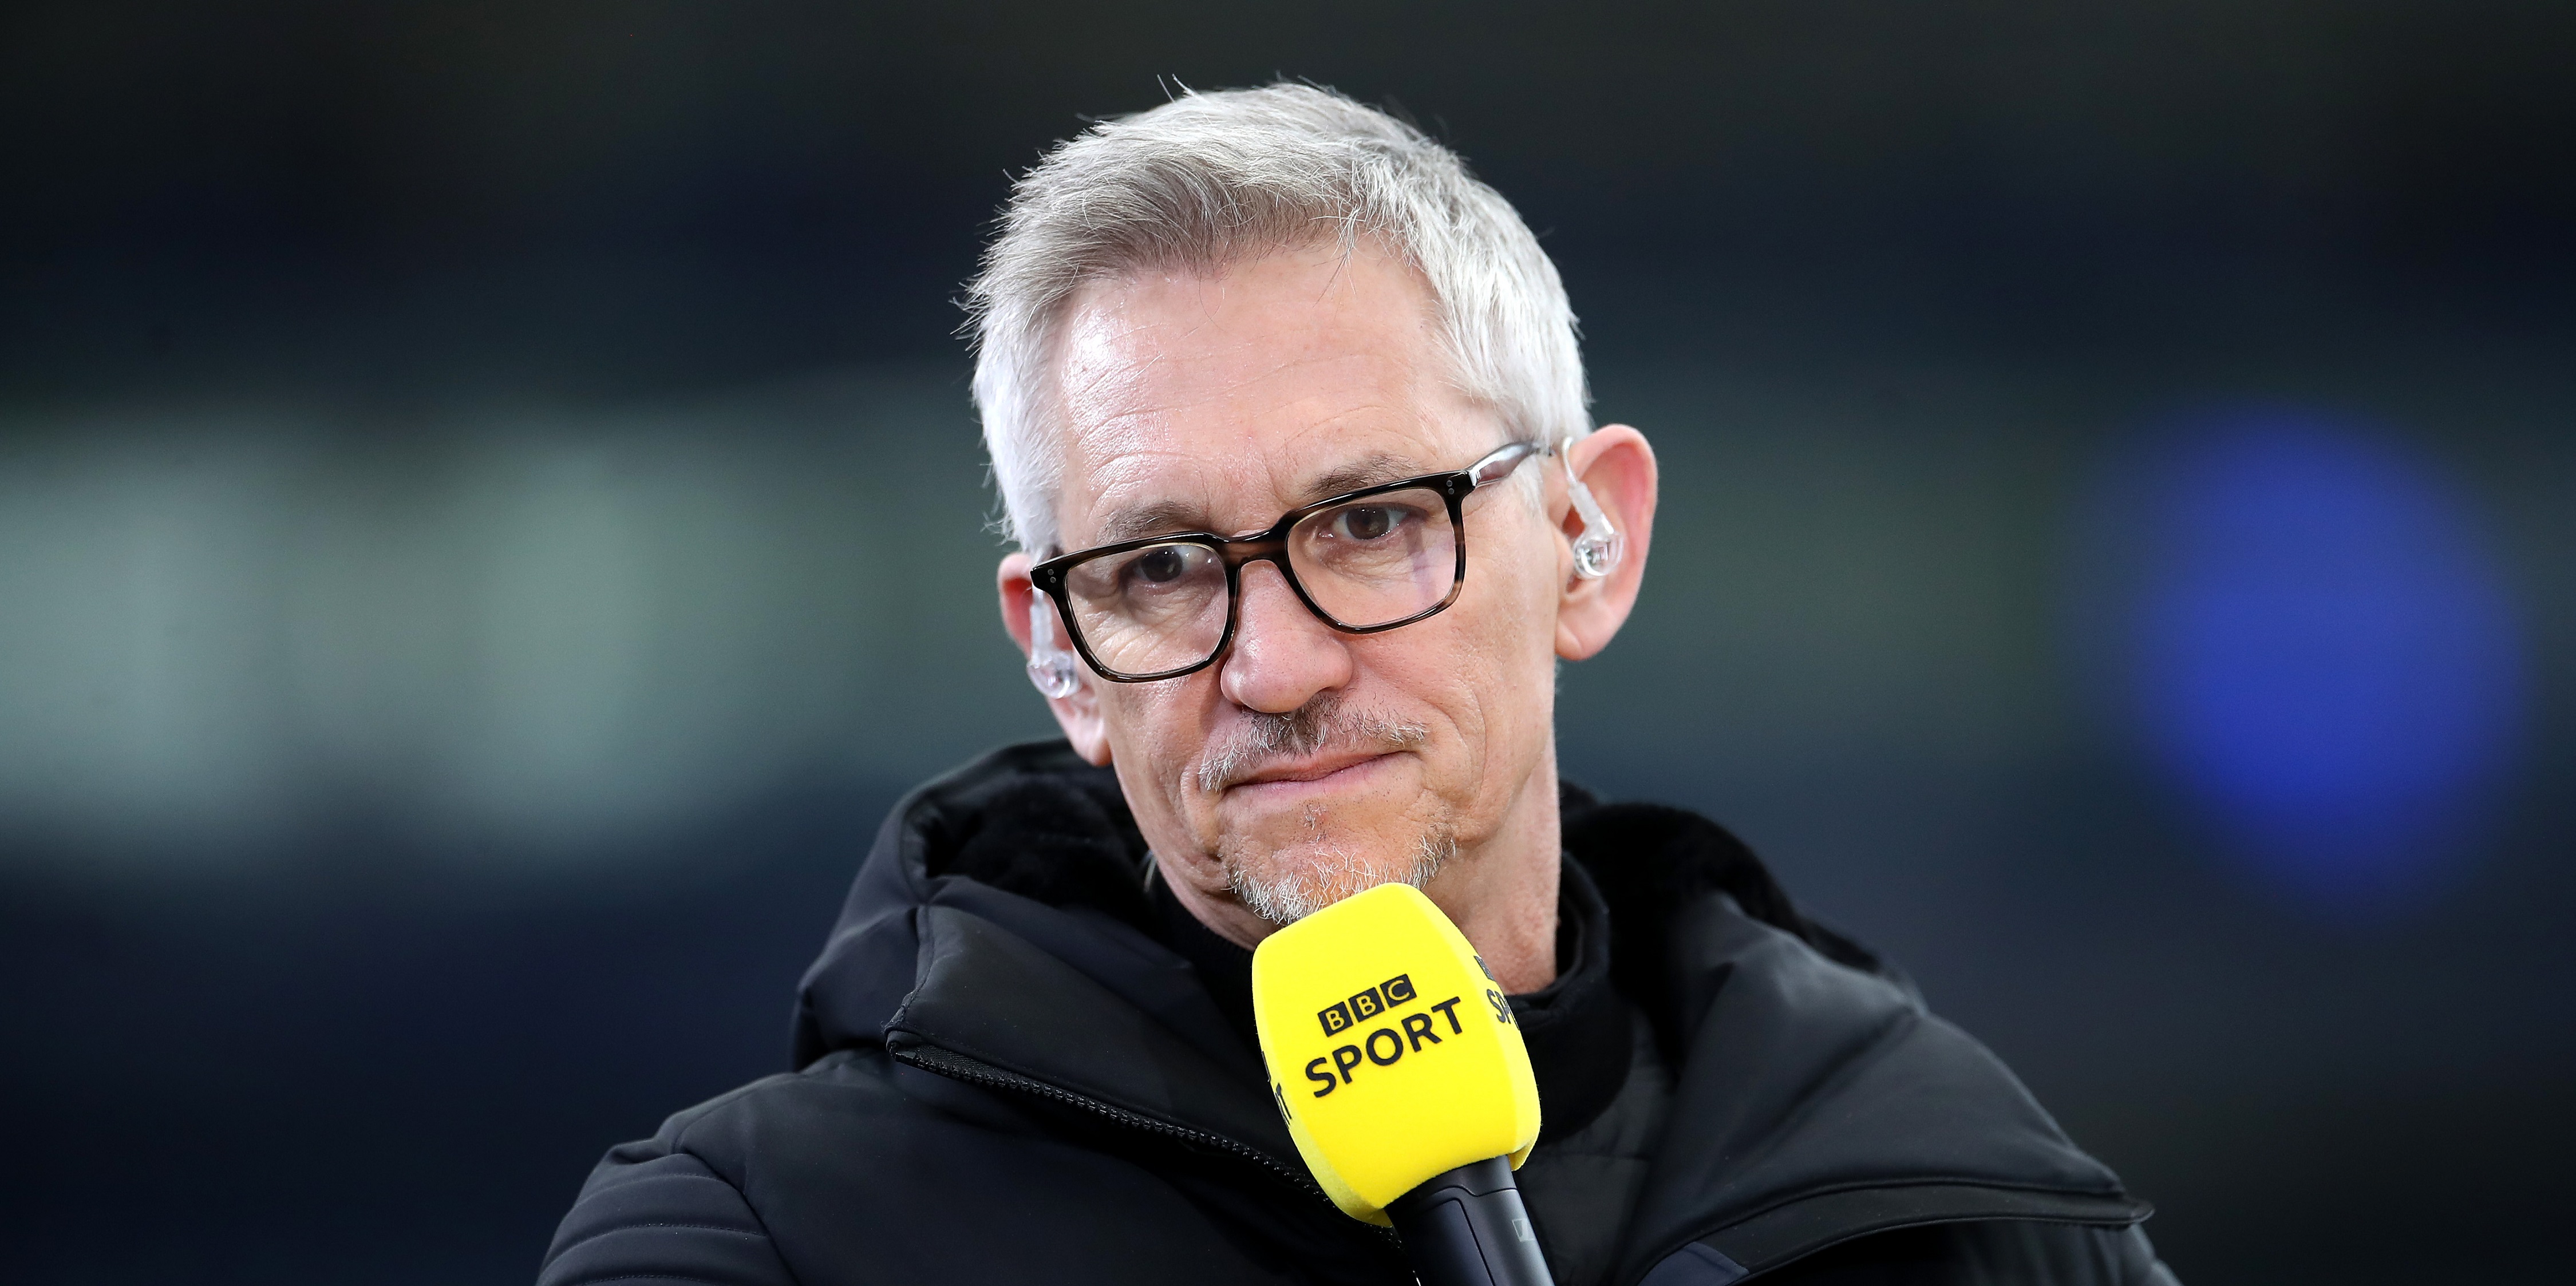 ‘It’s hard to envisage’ – Gary Lineker weighs in on the Premier League title race as Manchester City extend their lead over Liverpool to three points